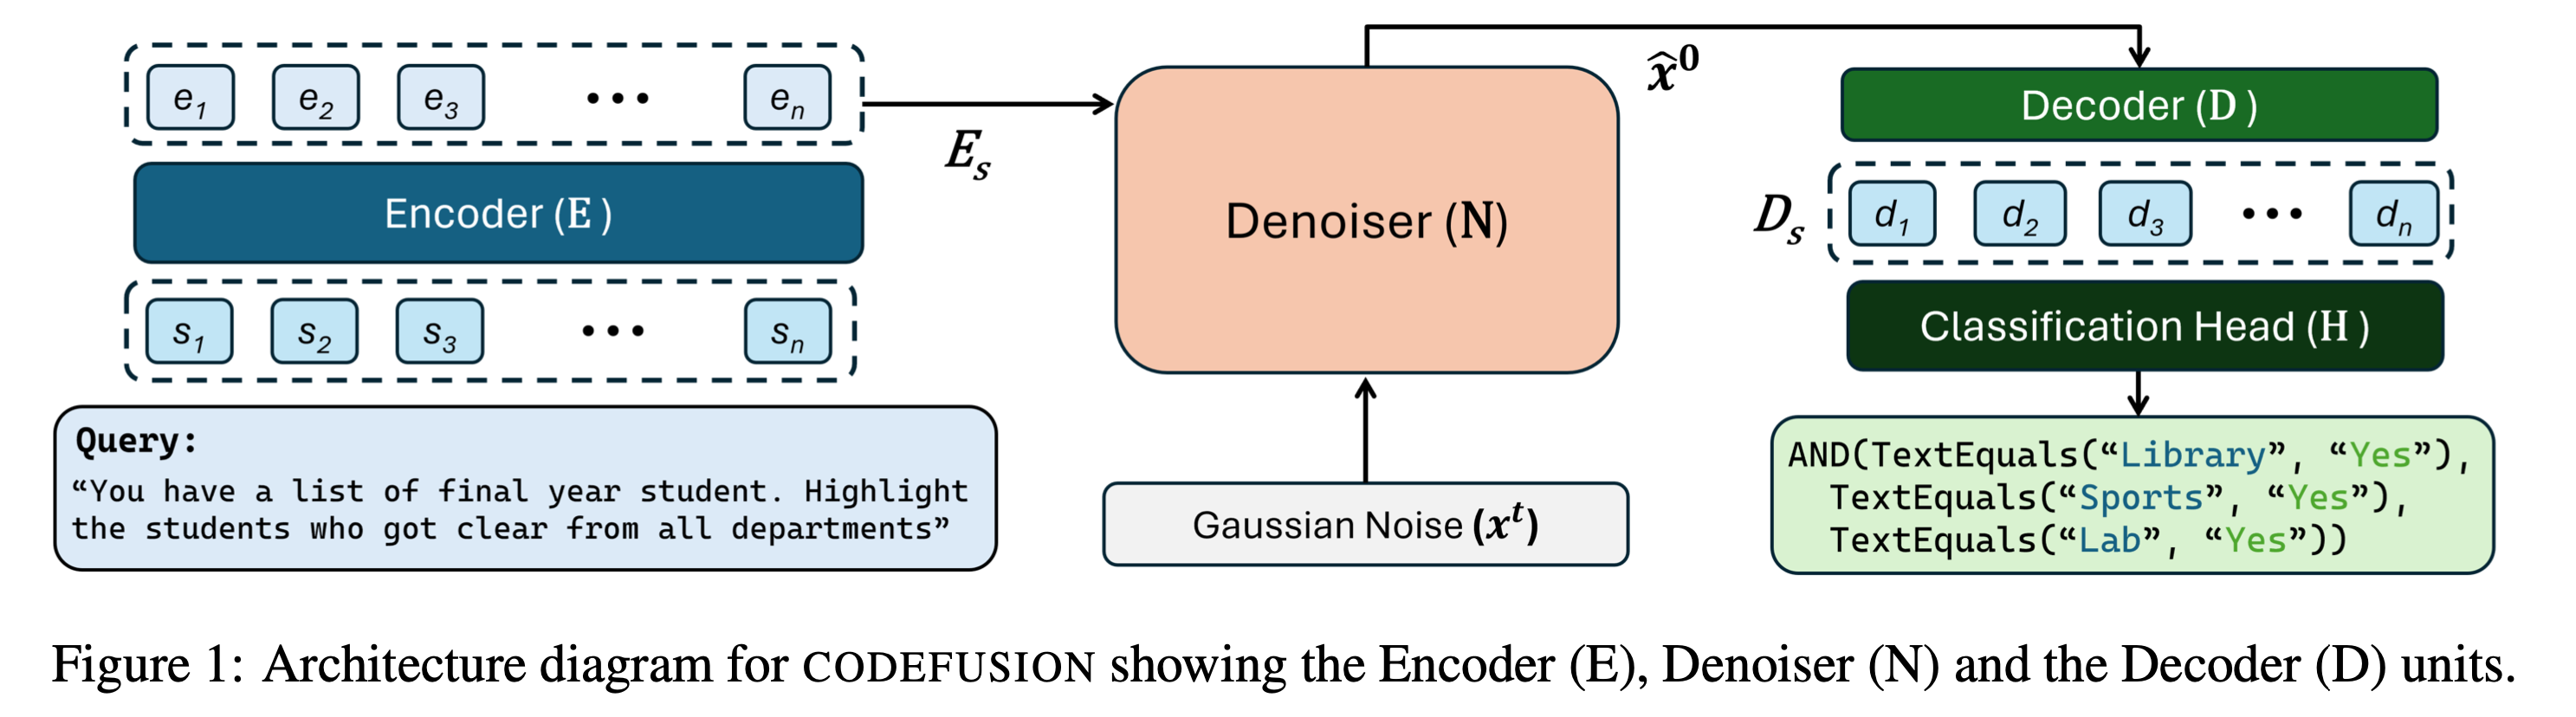 Overview of the CodeFusion model architecture. Figure taken from the <a href="https://aclanthology.org/2023.emnlp-main.716/">CodeFusion paper</a>